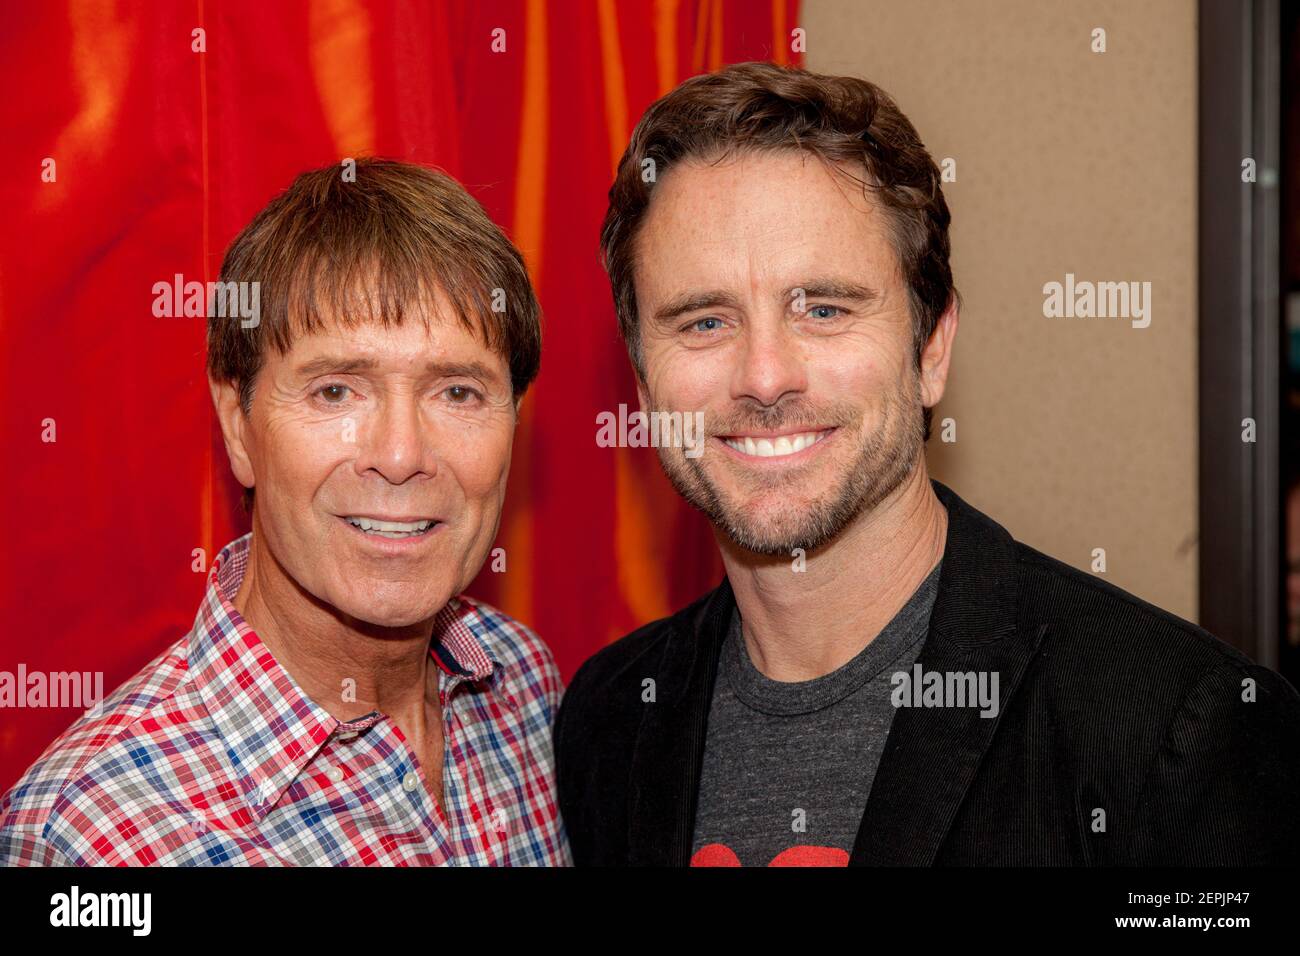 English pop star Sir Cliff Richard with American actor Charles Esten backstage at the Grand Ole Opry, Nashville, Tennessee, USA Stock Photo